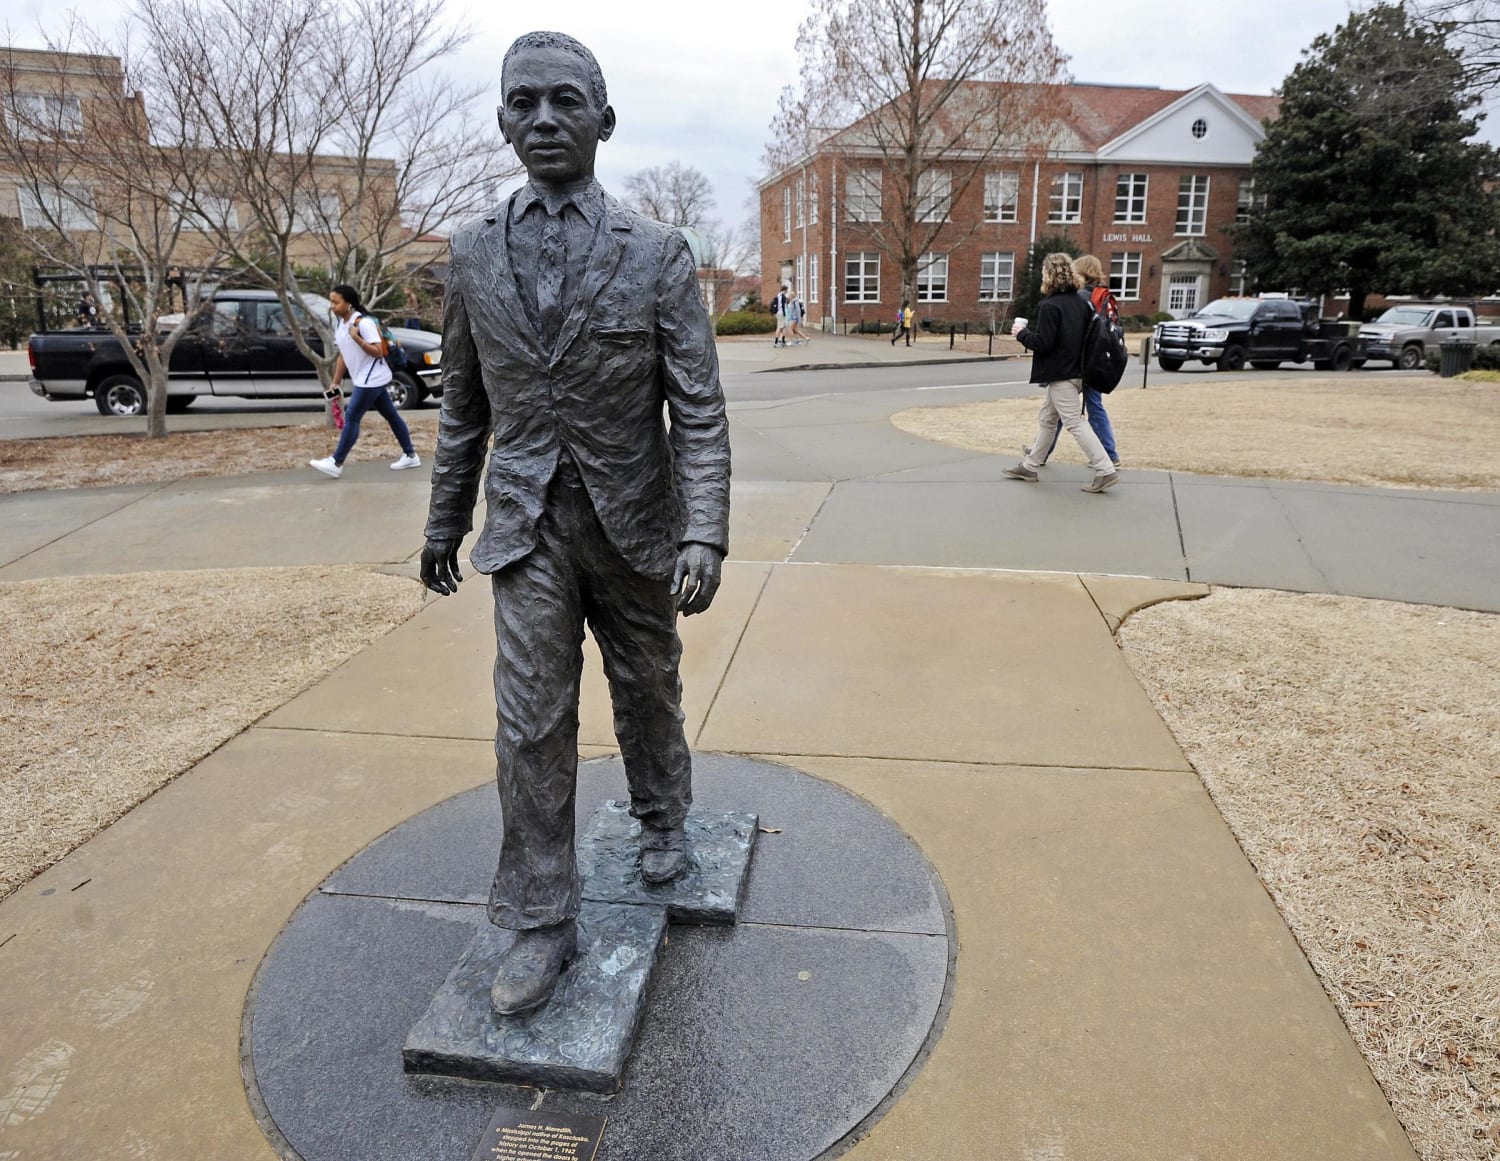 Ex University Of Mississippi Student Indicted For Noose On James Meredith Statue